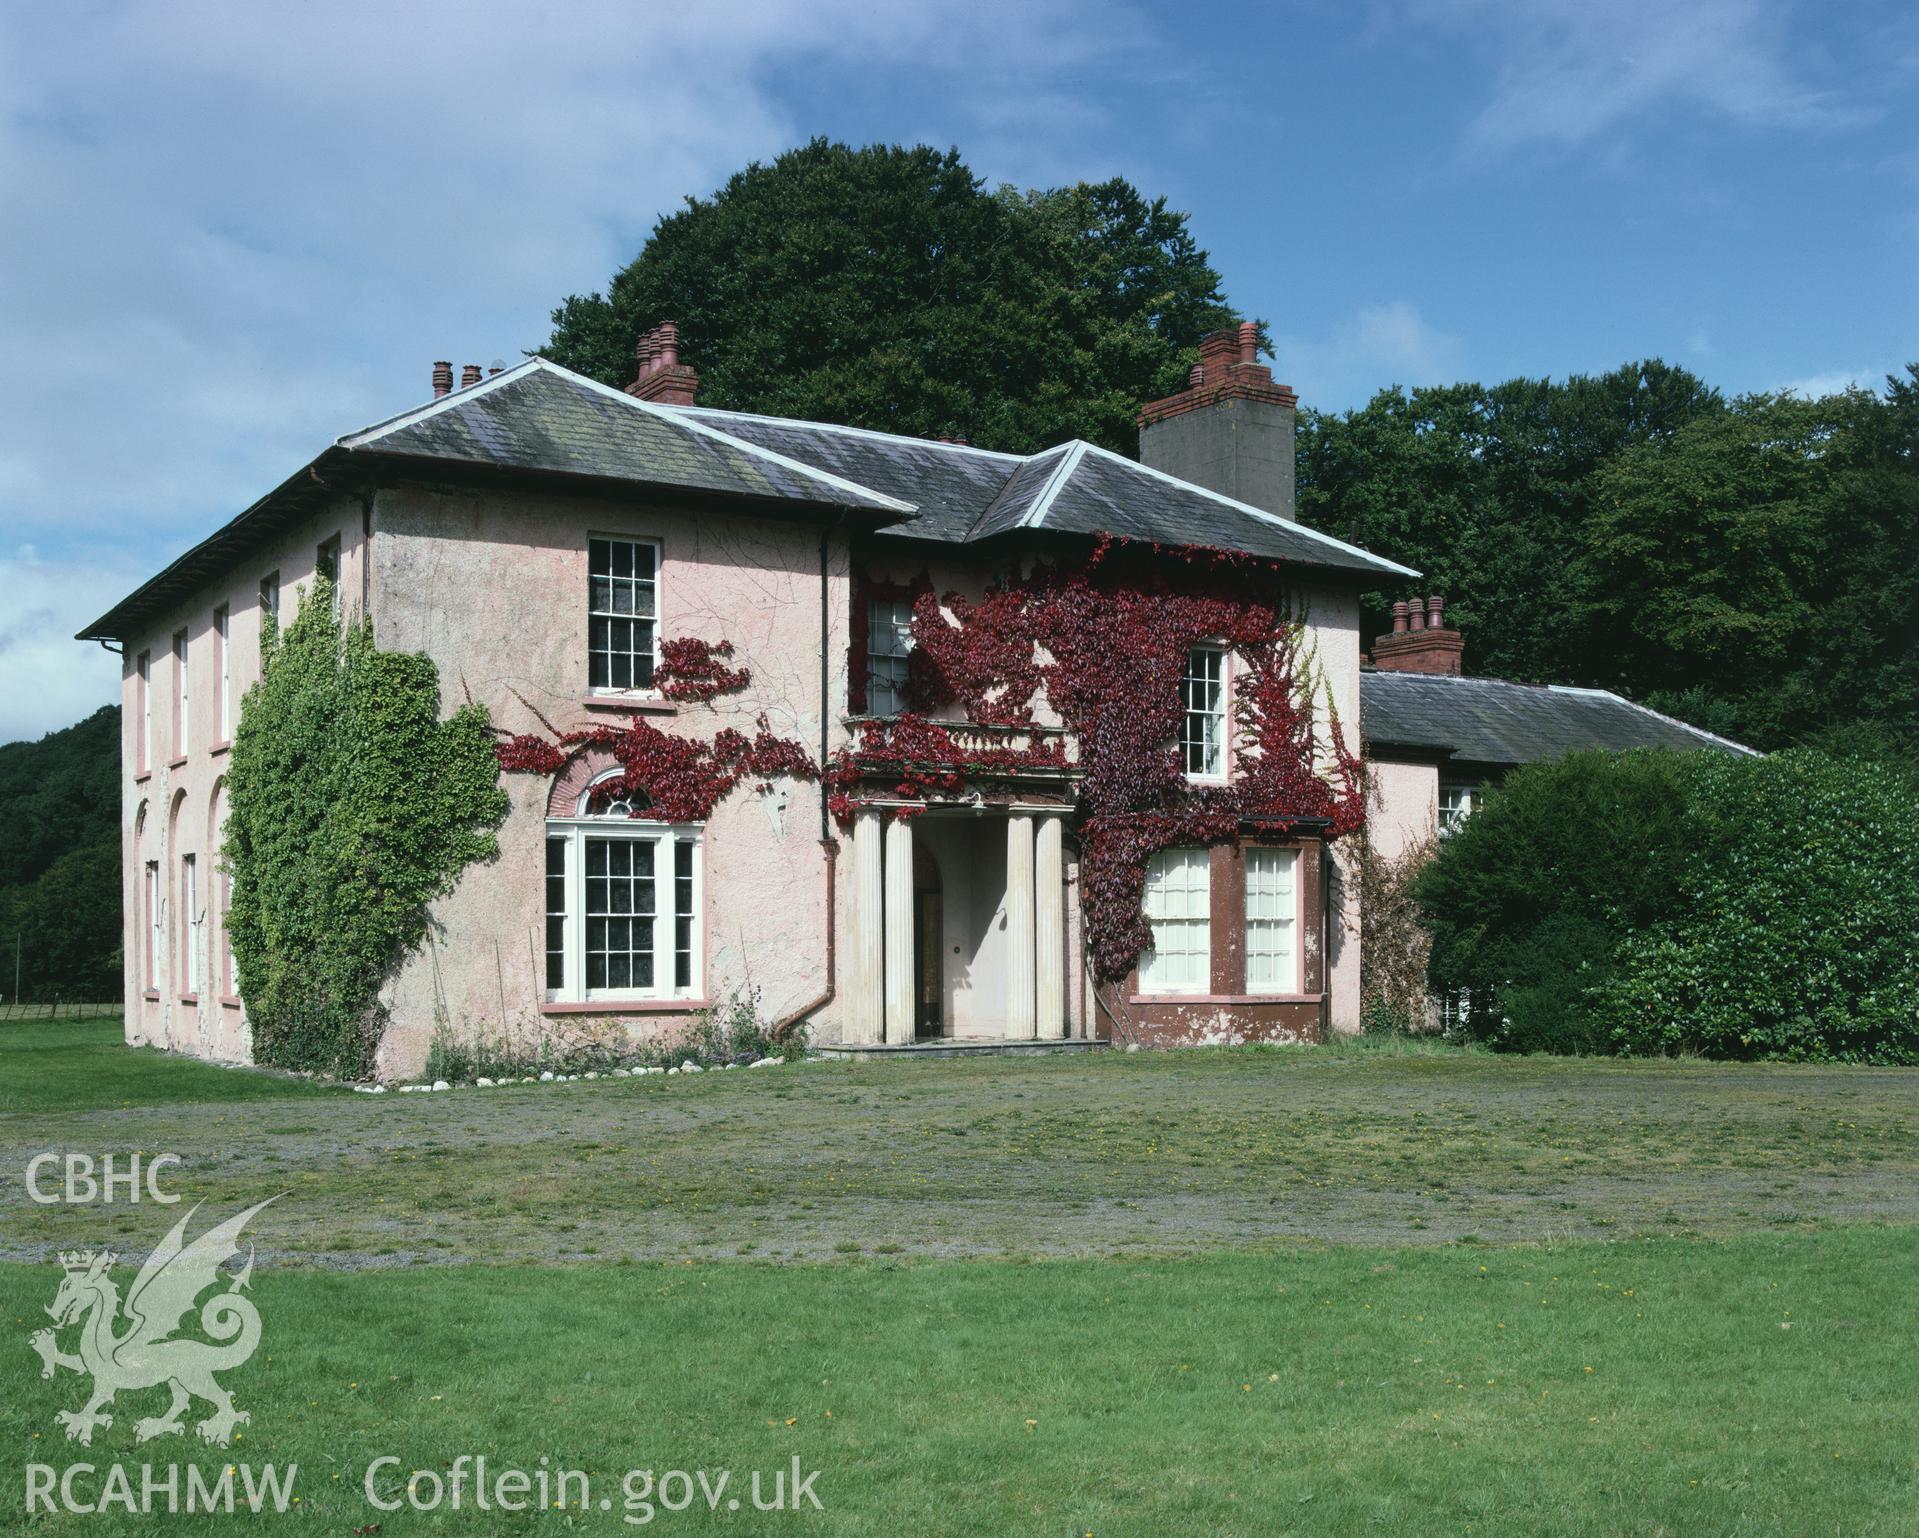 RCAHMW colour transparency showing exterior view of Llannerchaeron House, taken by Iain Wright, c.1997